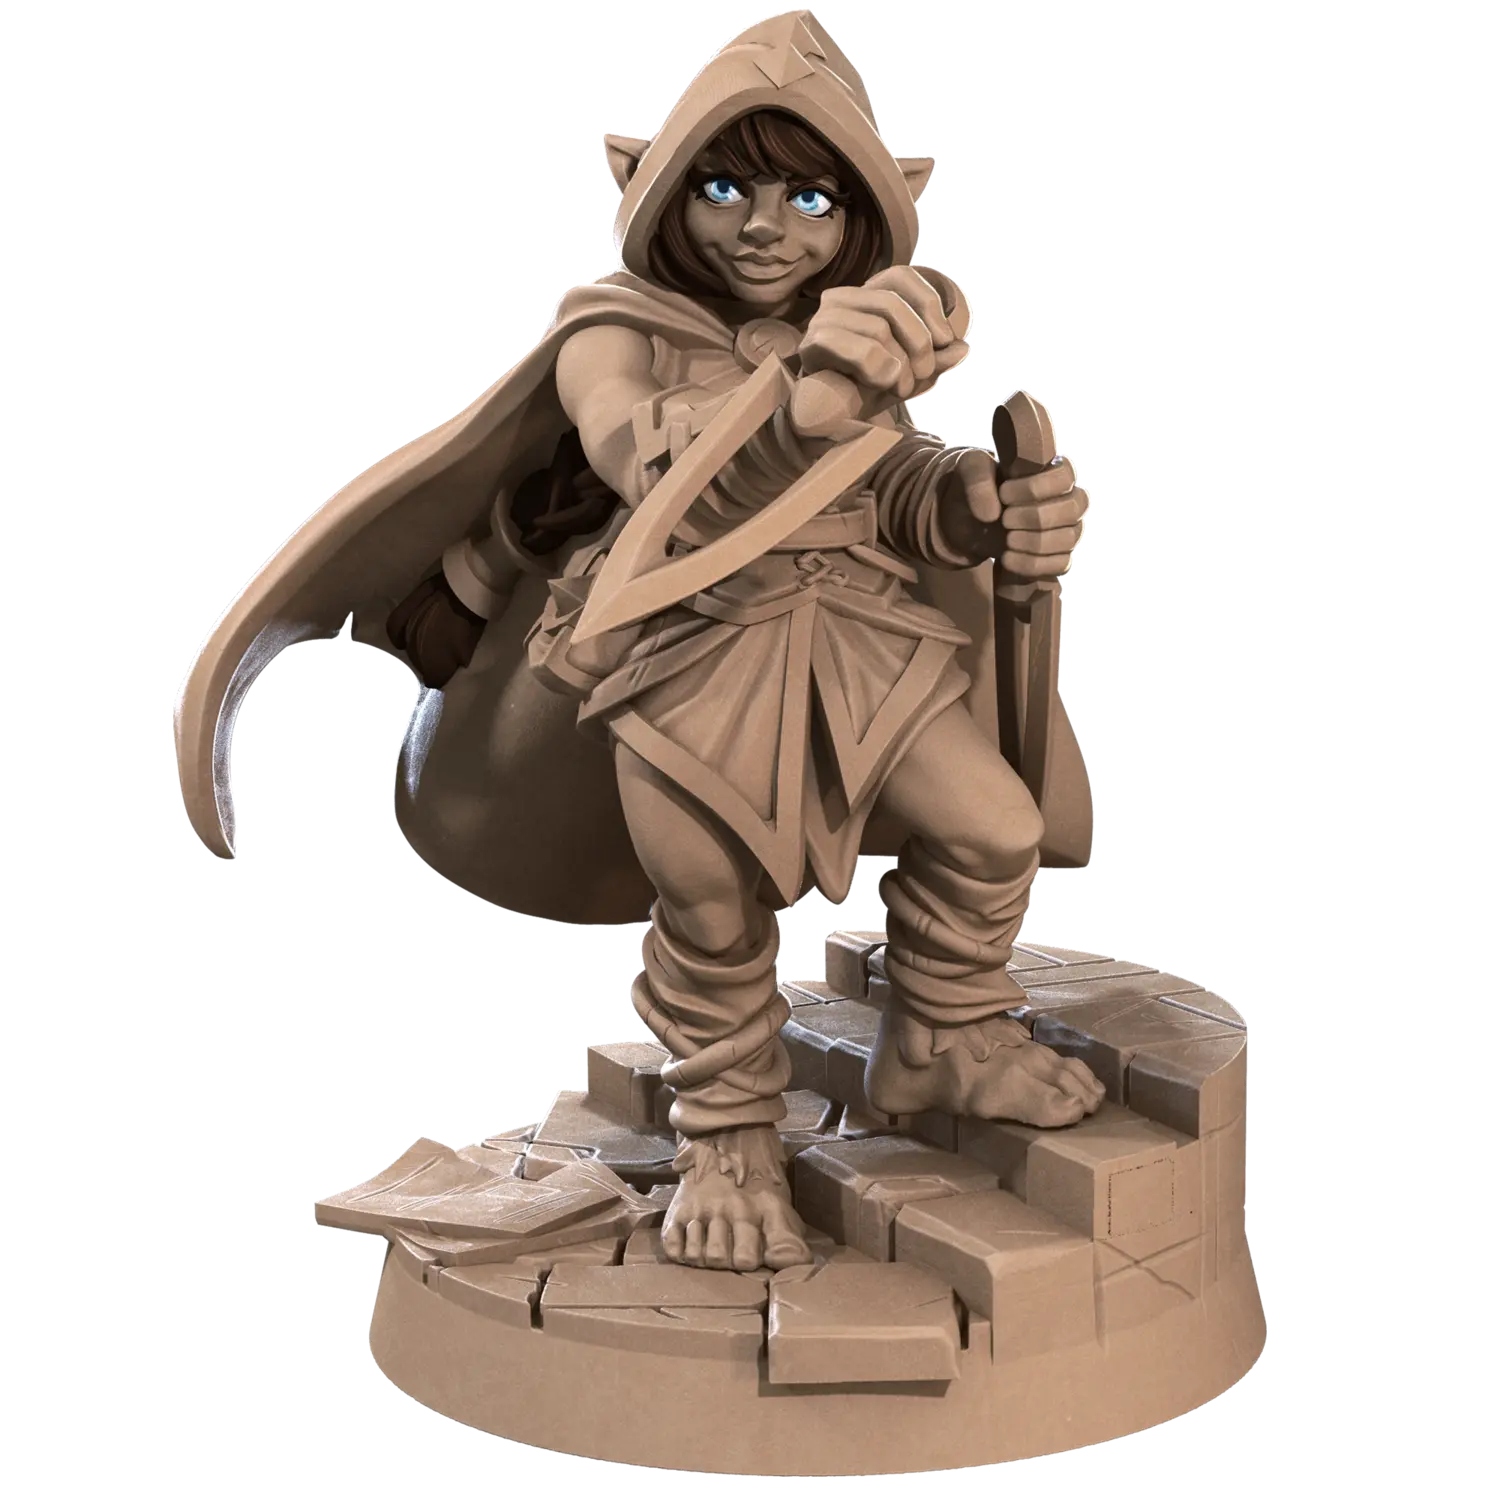 DnD Fighter - Halflings - Miniature - Monk - Ranger - Rogue Pialla  Fighter - Halflings - Miniature - Monk - Ranger - Rogue sold by DoubleHitShop